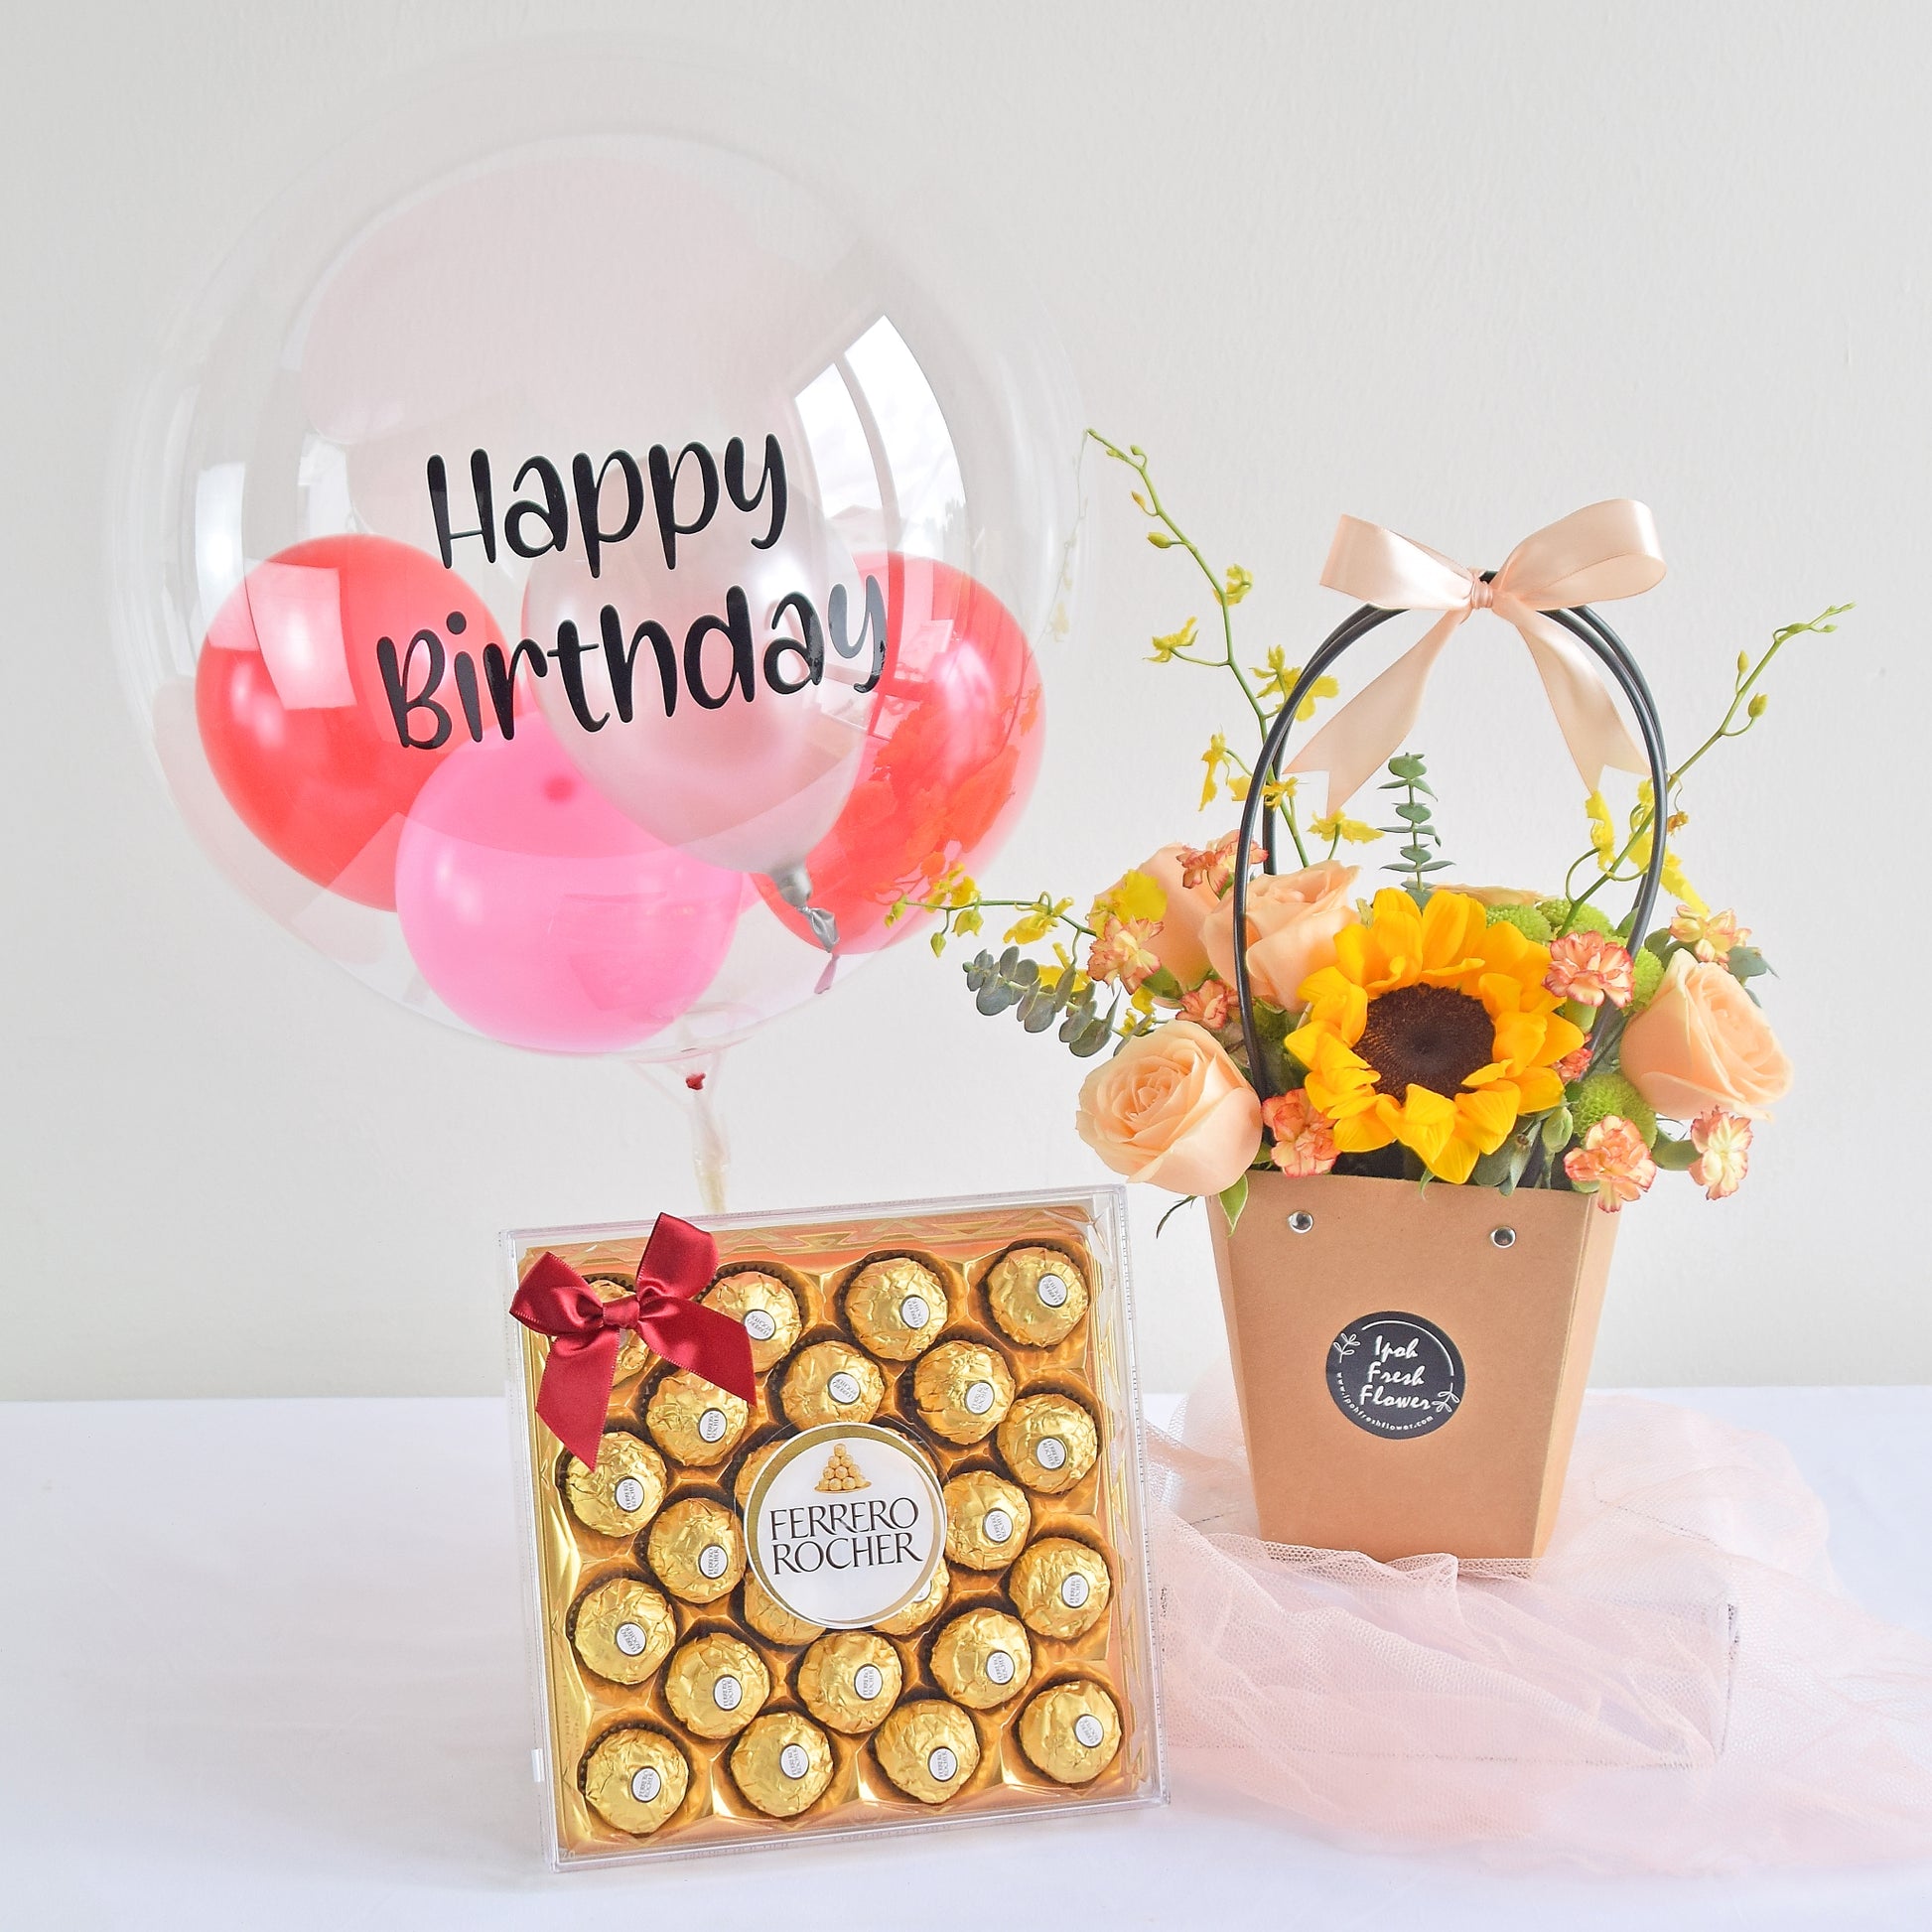 Peachy Sunshine Birthday Bundle| Flowers, Balloons &Cake| Same Day Delivery